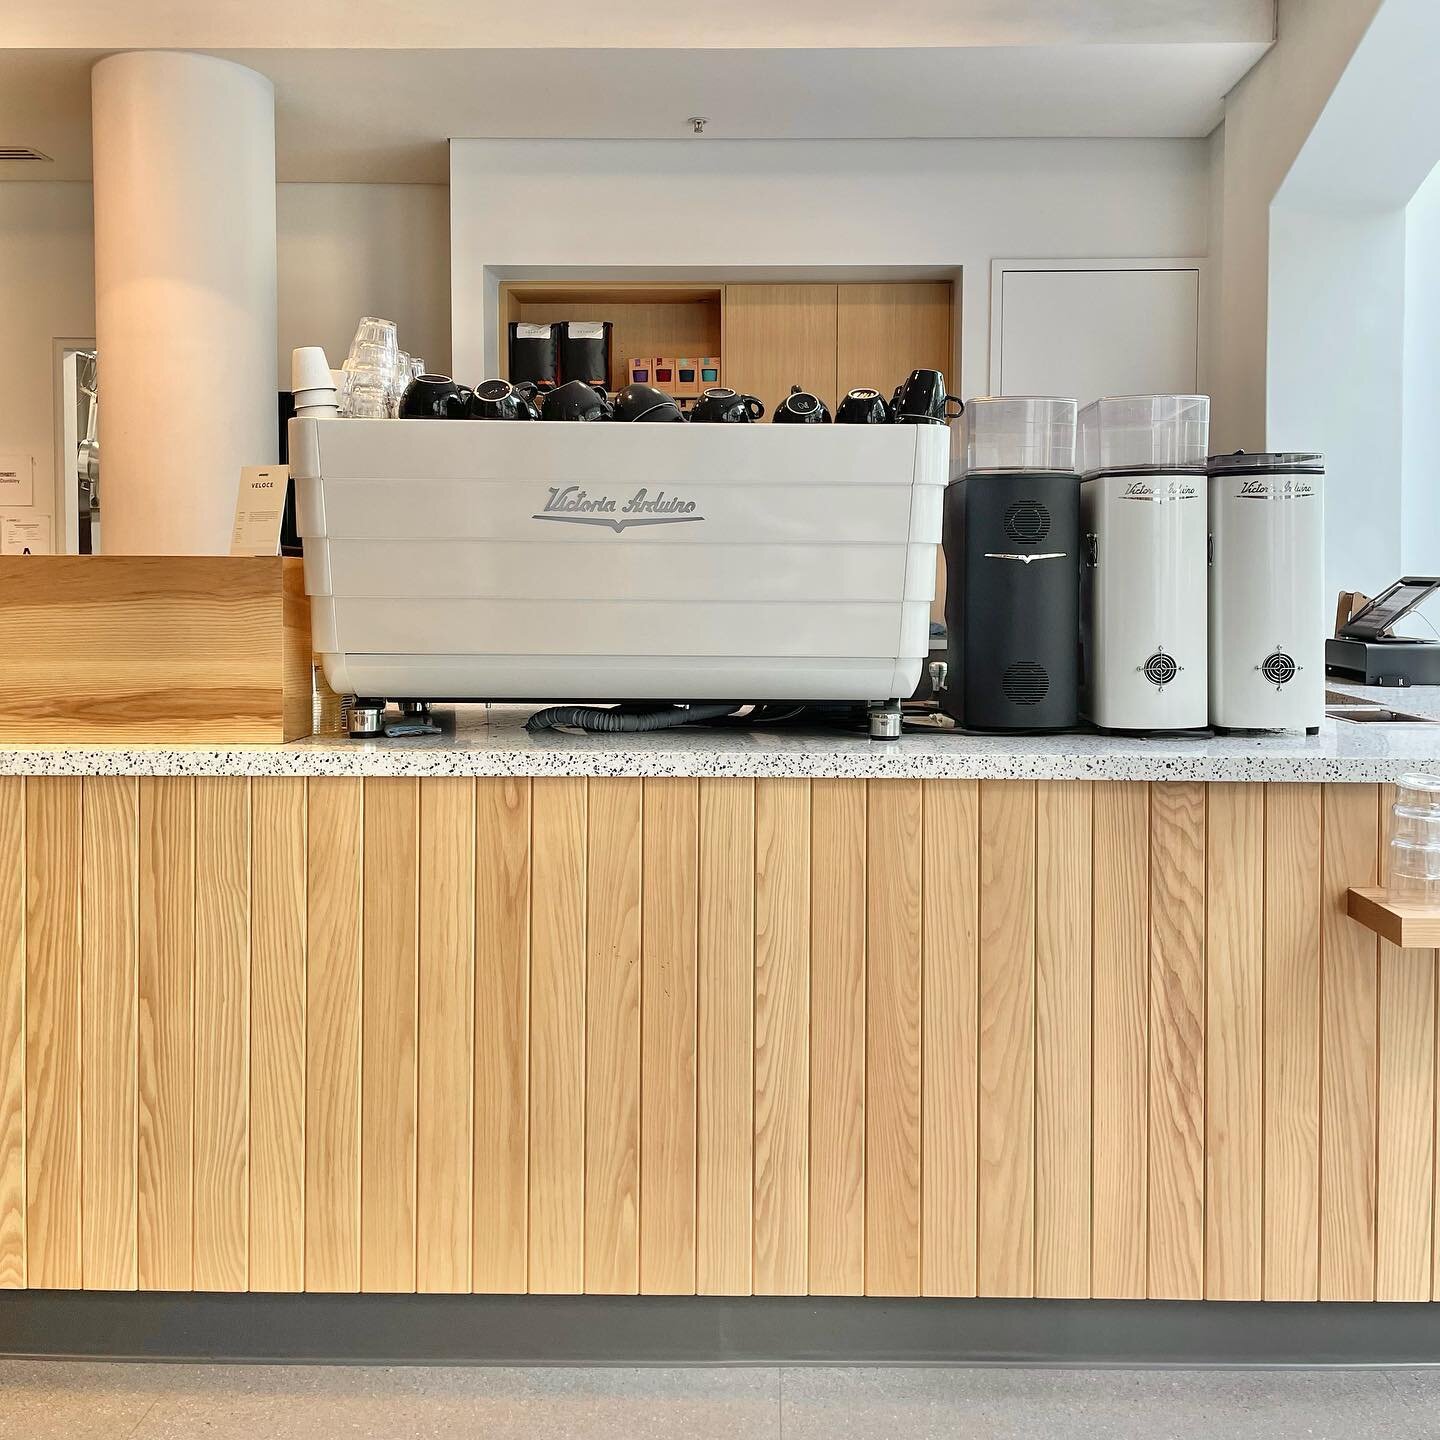 PRECINCT CAFE ⚒️ What a transformation! Staying true to this incredible brand with great history, but giving it a fresh new look 🤎 We love everything about it! ☕️ 
#cafedesign #coffeeshopdesign #coffeeshop #coffeesetup #dunedincoffee #dunedinsbestco